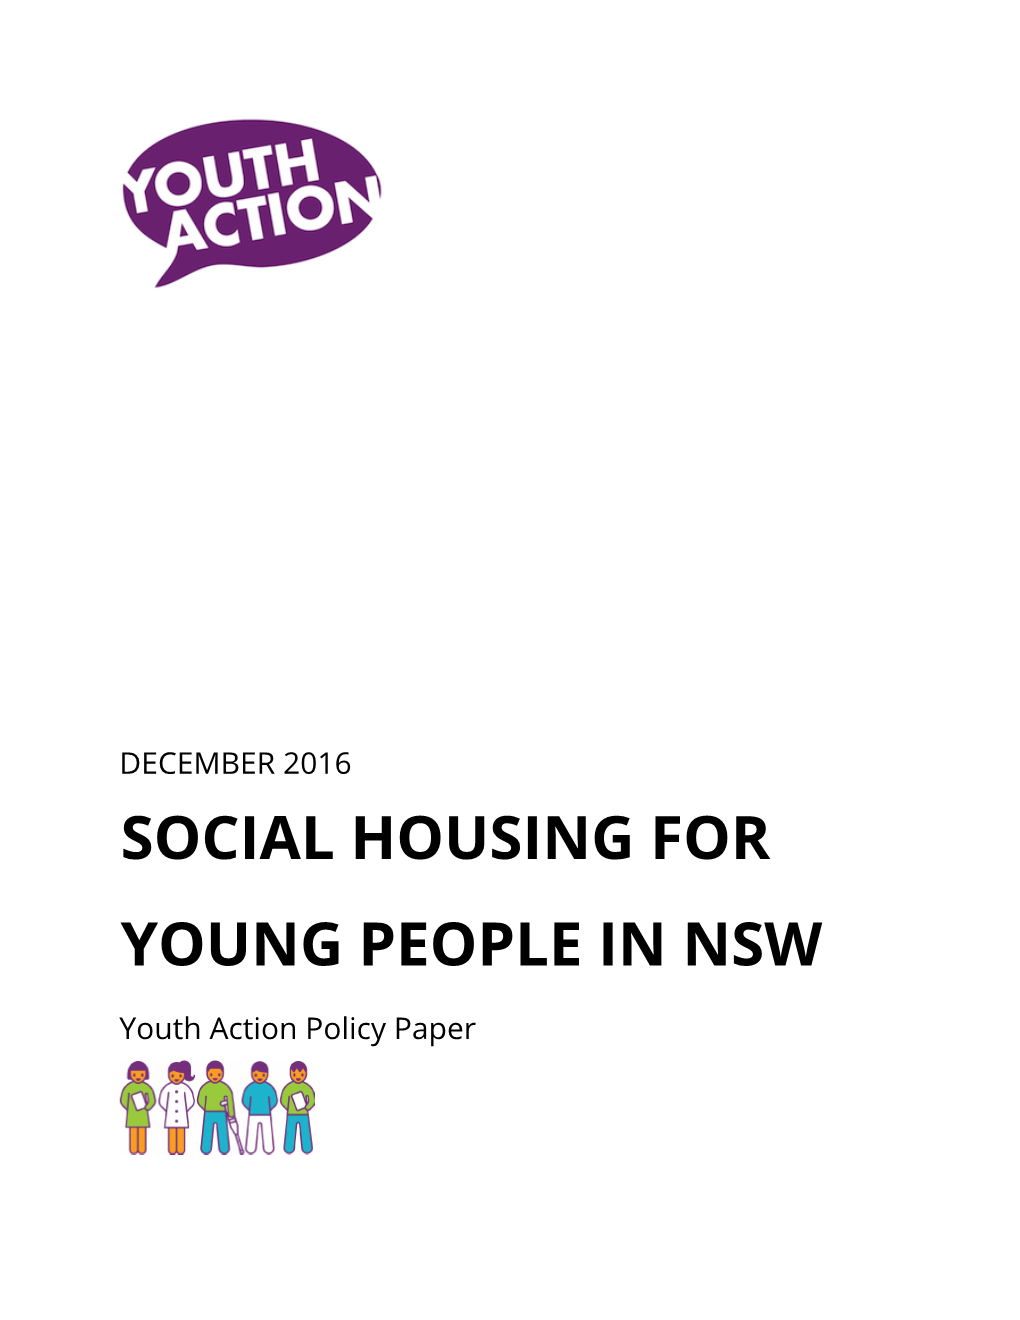 Social Housing for Young People in Nsw